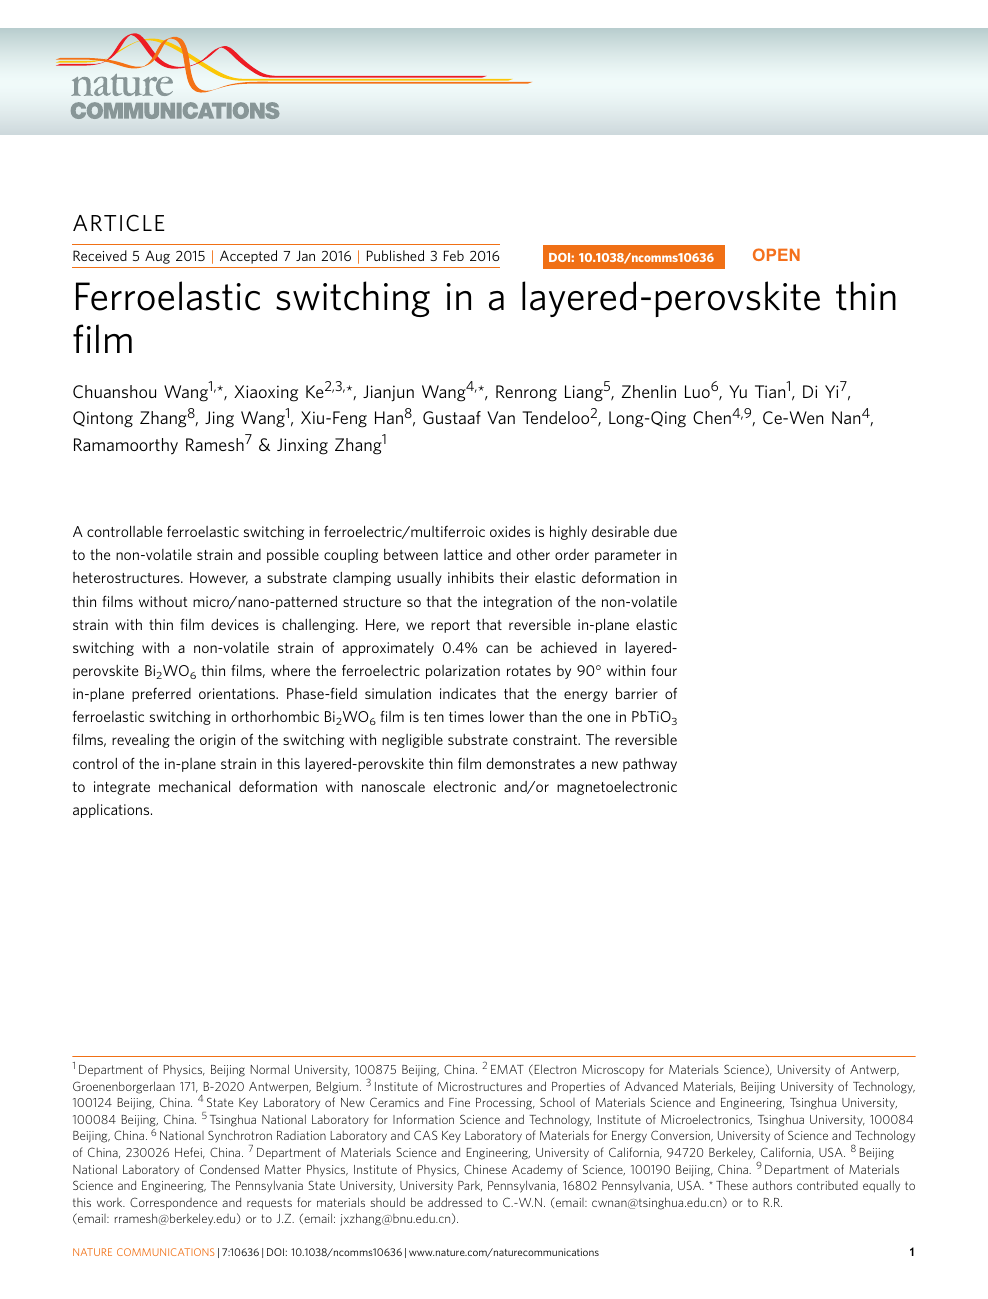 Ferroelastic Switching In A Layered Perovskite Thin Film Topic Of Research Paper In Nano Technology Download Scholarly Article Pdf And Read For Free On Cyberleninka Open Science Hub